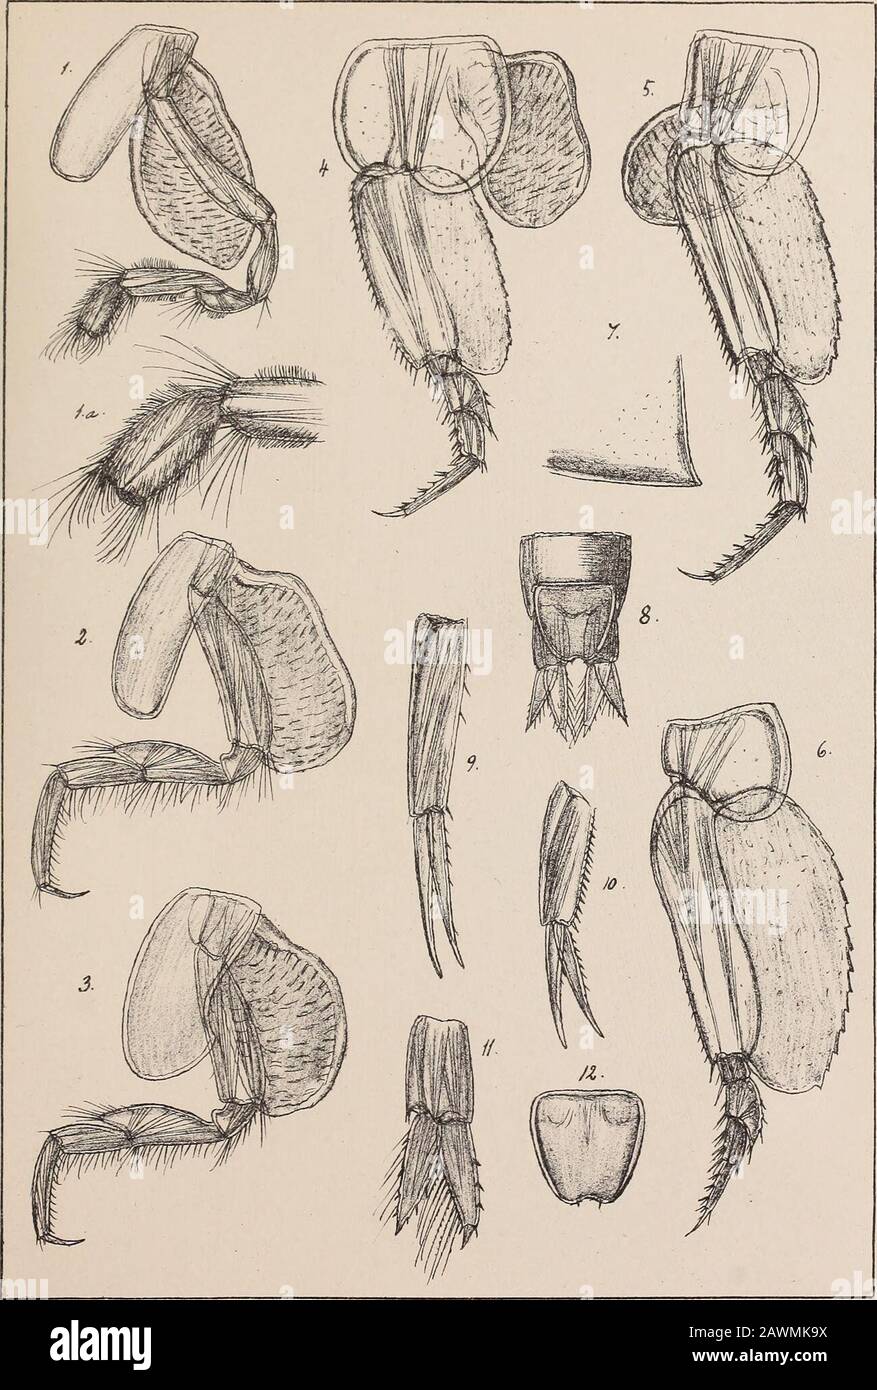 The Norwegian North polar expedition, 1893-1896; scientific results . G.O.Sars aiitogr. trykt i der, priv.Cpma2.ling Chra PLATE V. PLATE V. Pseudalibrotus Nanseni, G. 0. Sars,(continued). Fig. 1. Posterior gnathopod with branchial lamella. — la. Extremity of same, more highly magnified. — 2. First pereiopod. — 3. Second pereiopod. — 4. Third pereiopod. — 5. Fourth pereiopod. — 6. Last pereiopod. — 7. Postero-lateral corner of last epimeral plate of metasome. — 8. Terminal segment of urosome, with last pair of uropoda and telson; dorsal view. — 9. First uropod. — 10. Second uropod. — 11. Last u Stock Photo